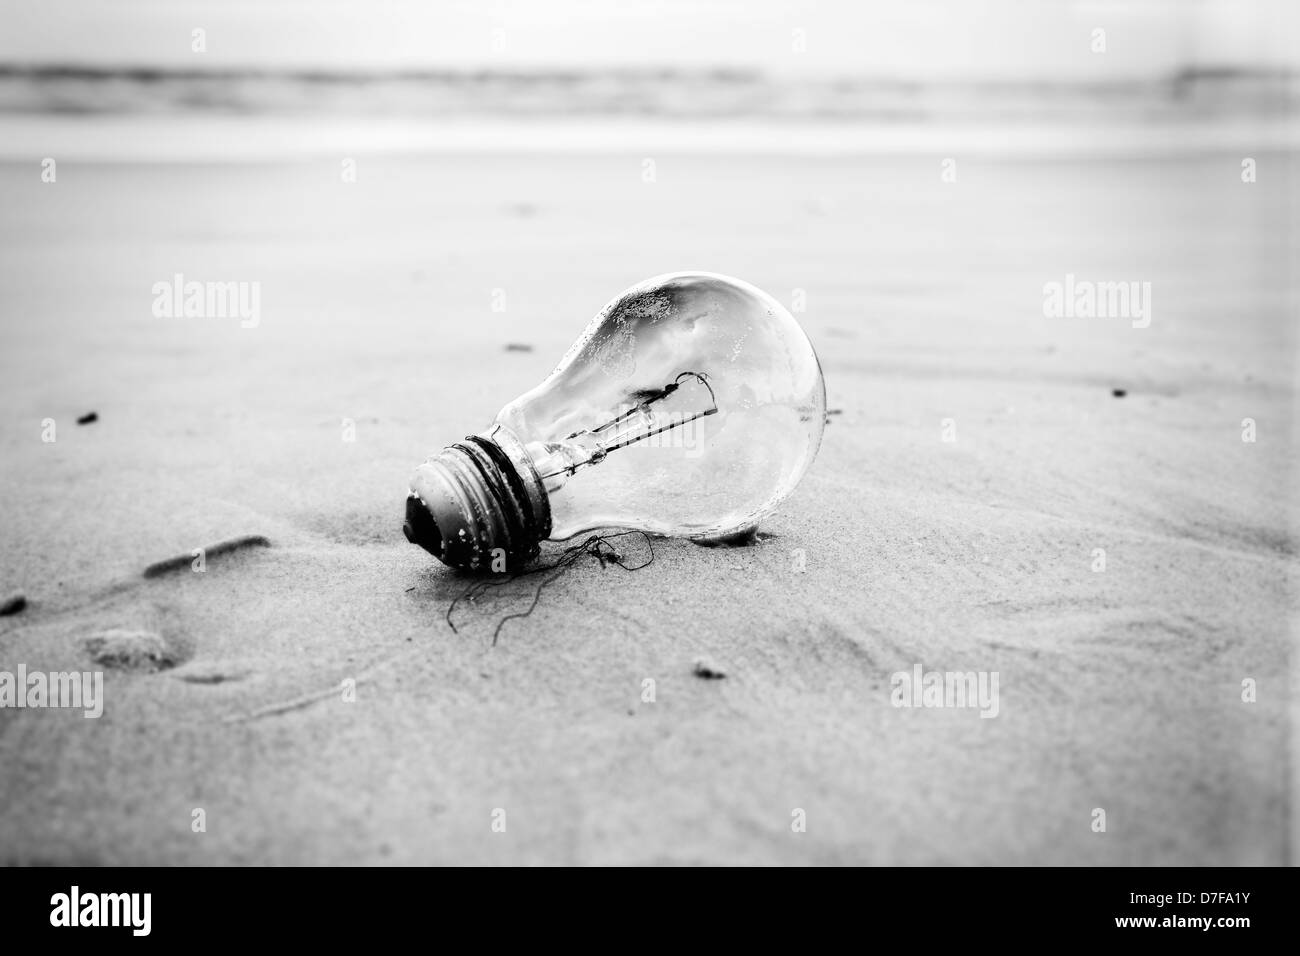 A used burnt-out incandescent light bulb abandoned on sandy beach in inclement weather. Relates to energy conservation Stock Photo